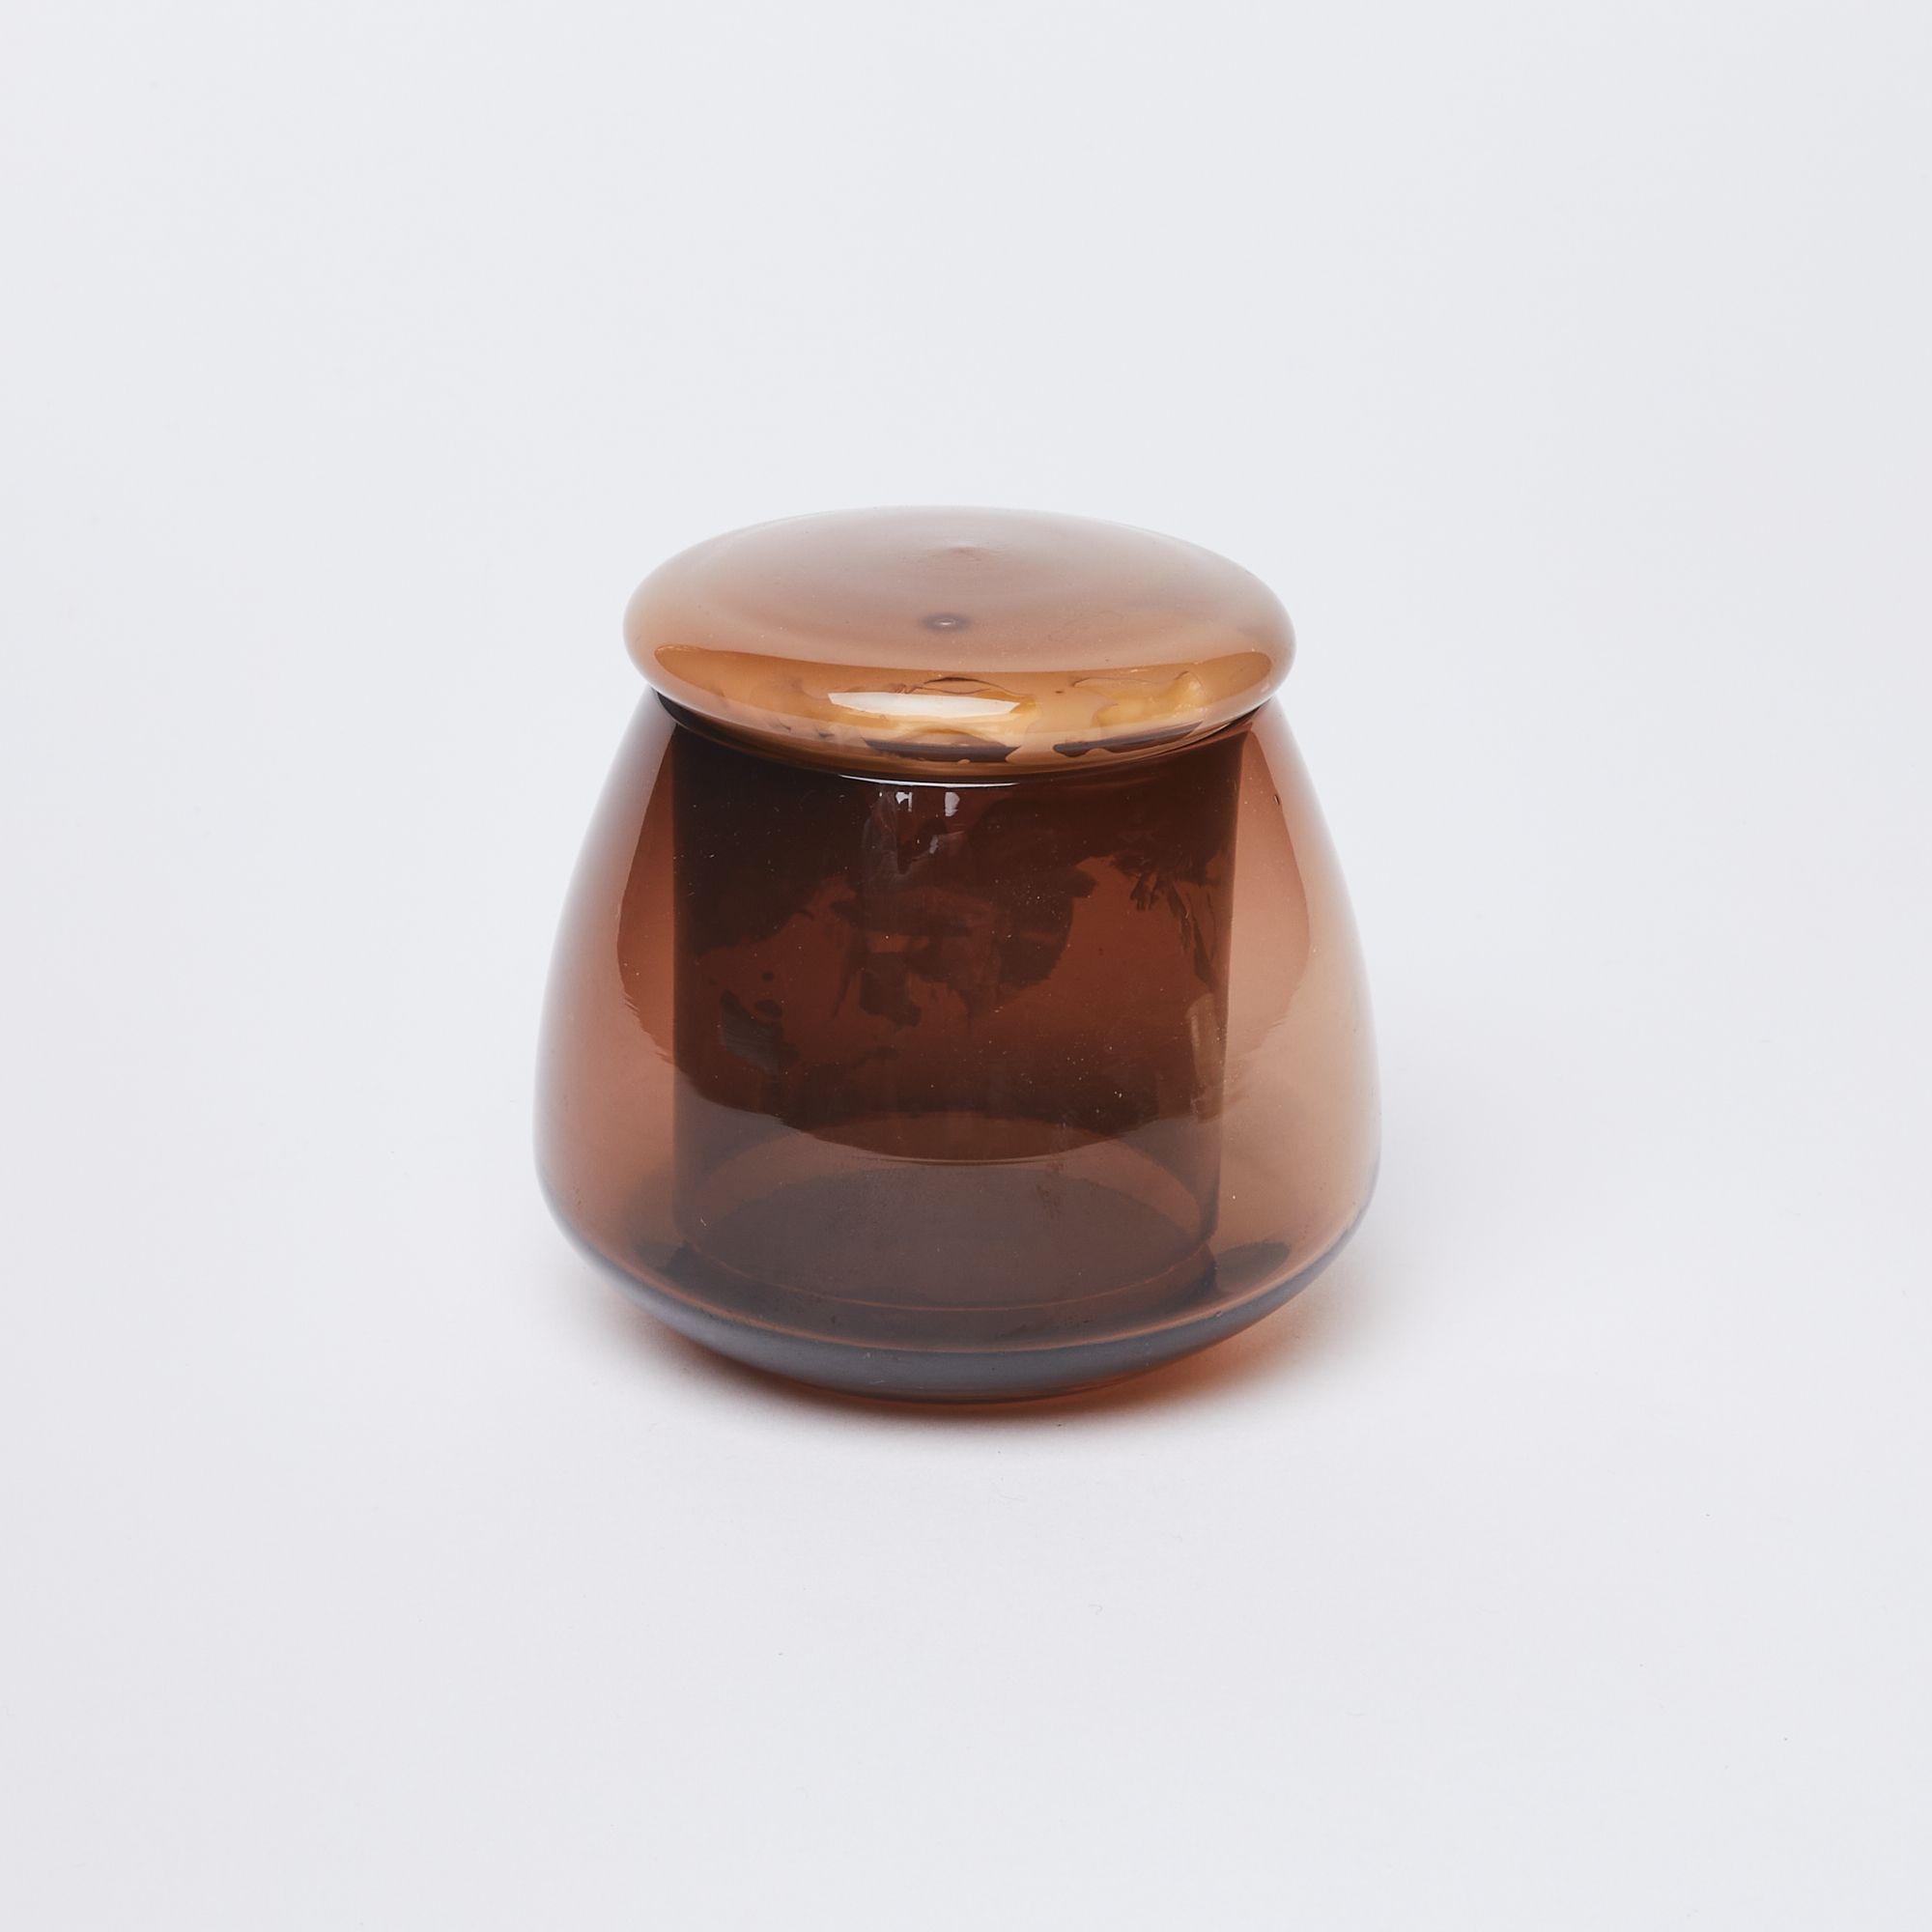 Brown glass butter keeper filled with butter